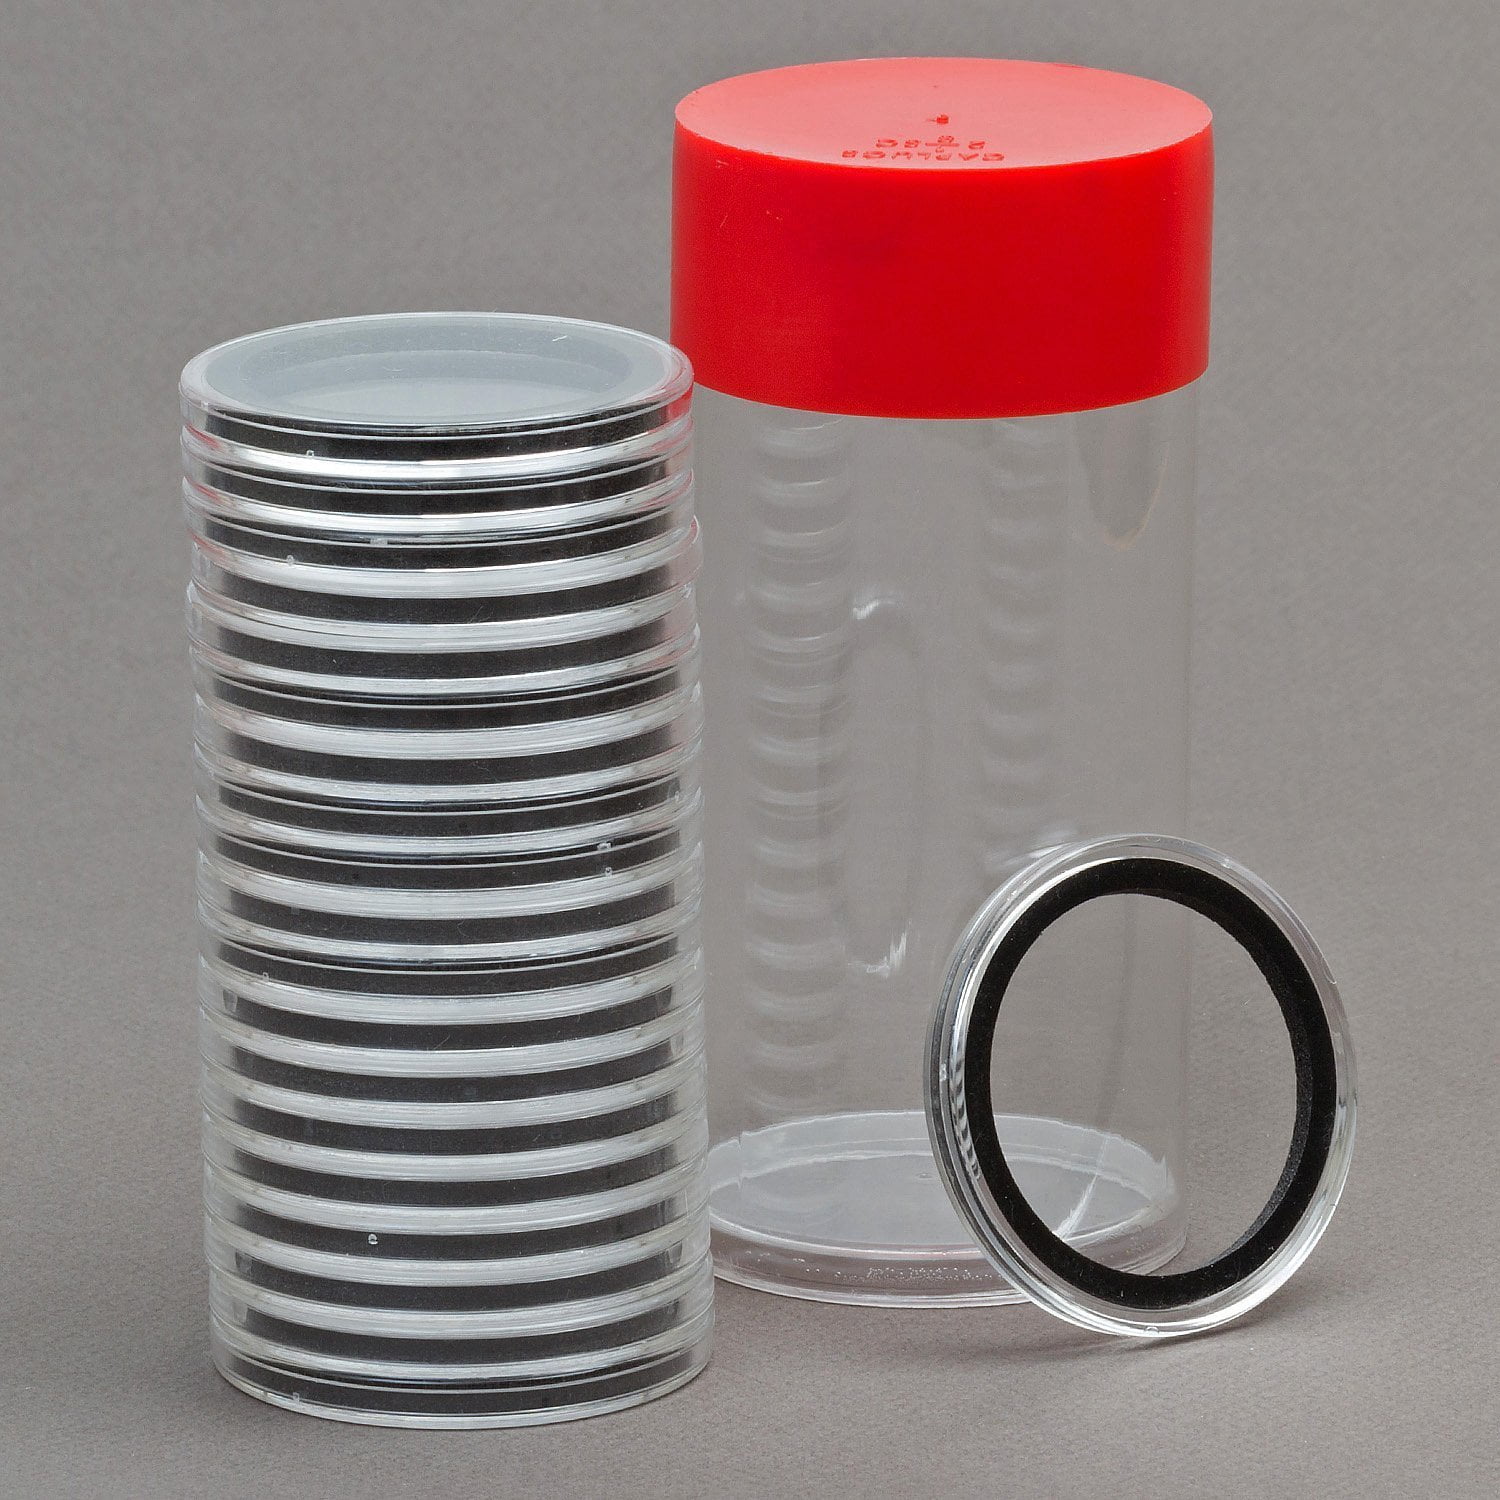 Details about   One Red Capsule Tube & 20 Air-Tite 34mm Black Ring Coin Holders 